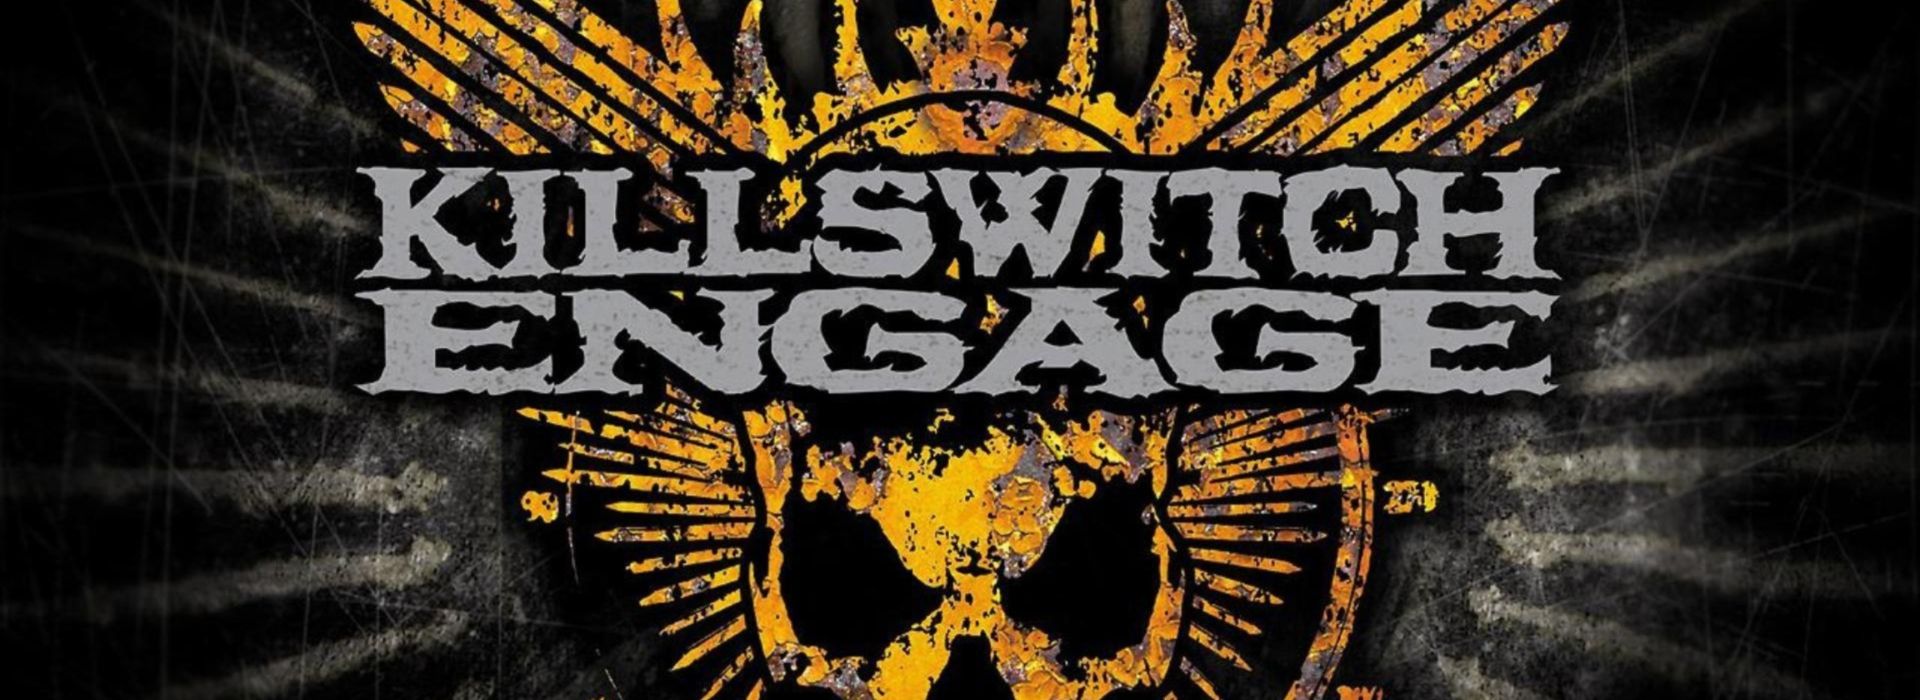 Killswitch Engage Store Banner 1